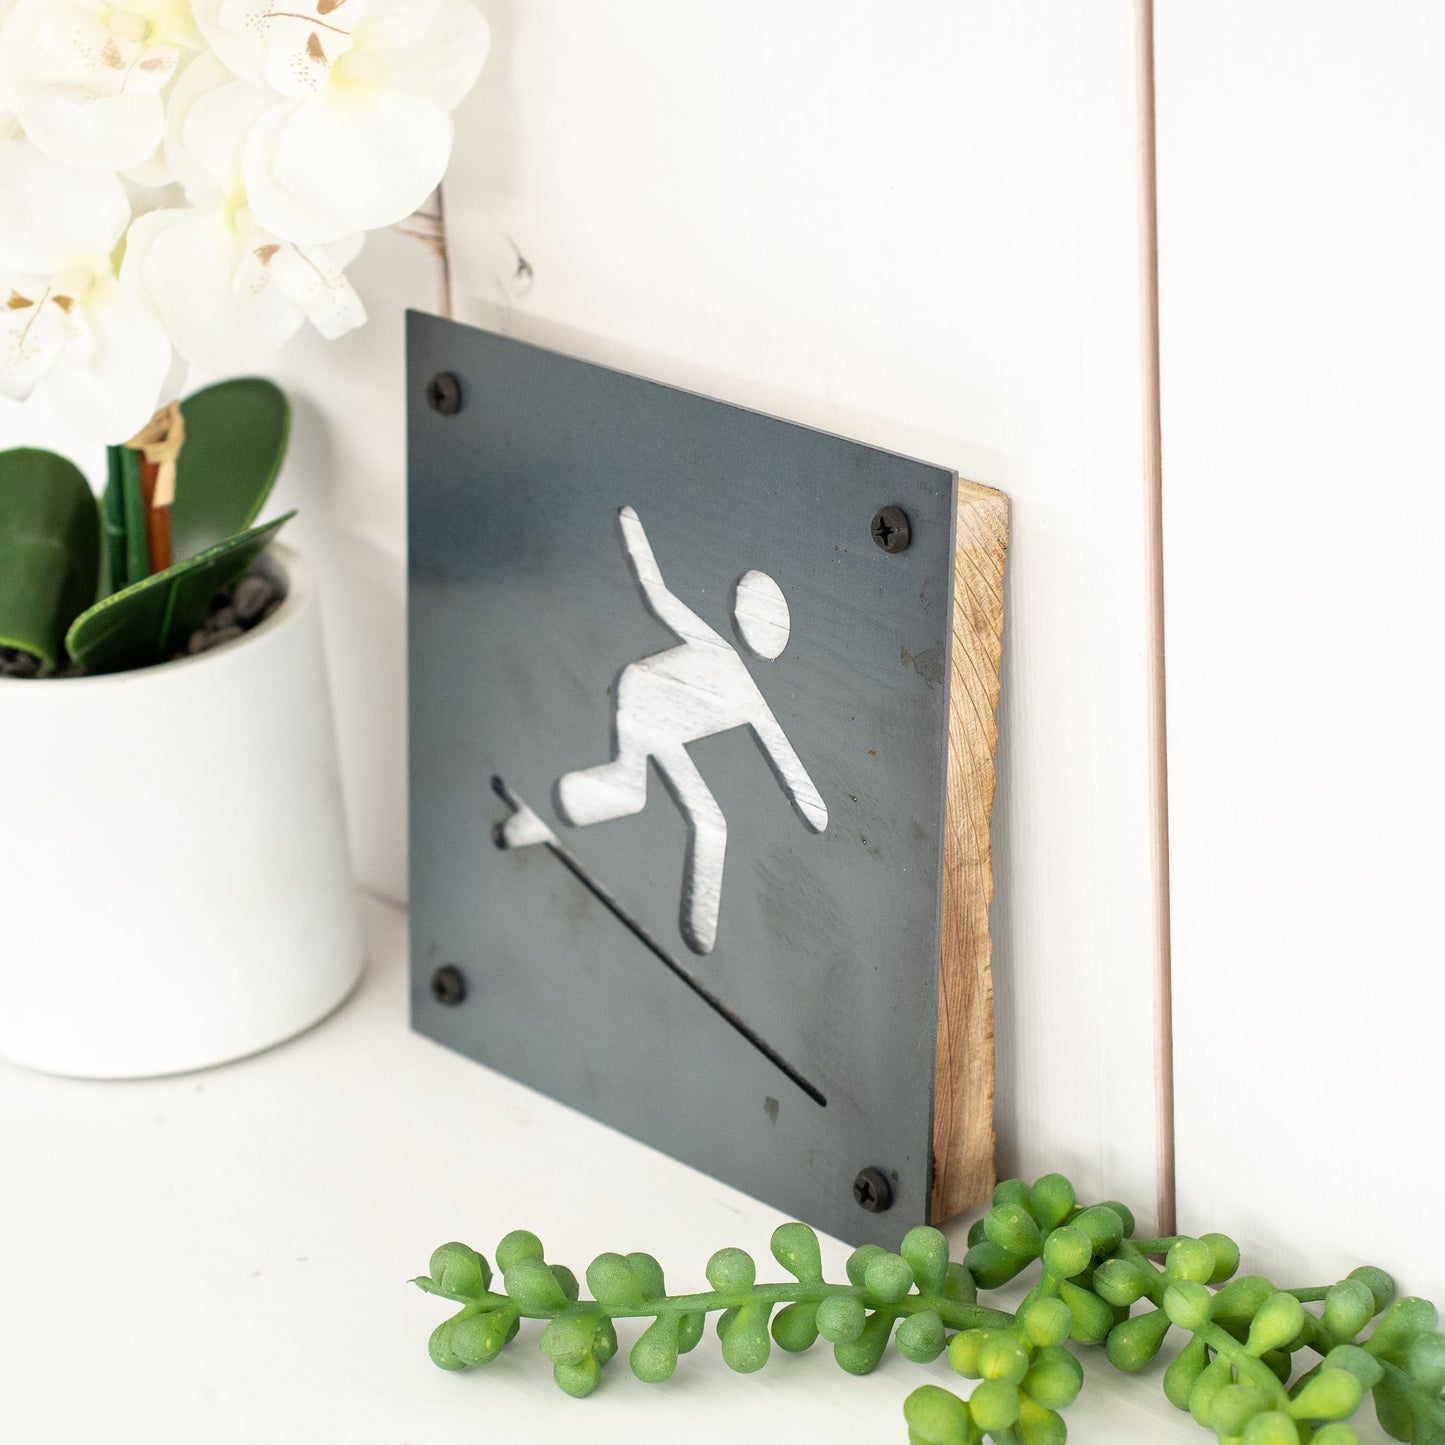 Surfing Symbol Sign - Handmade Beach Decor for the Surfer in Your Life